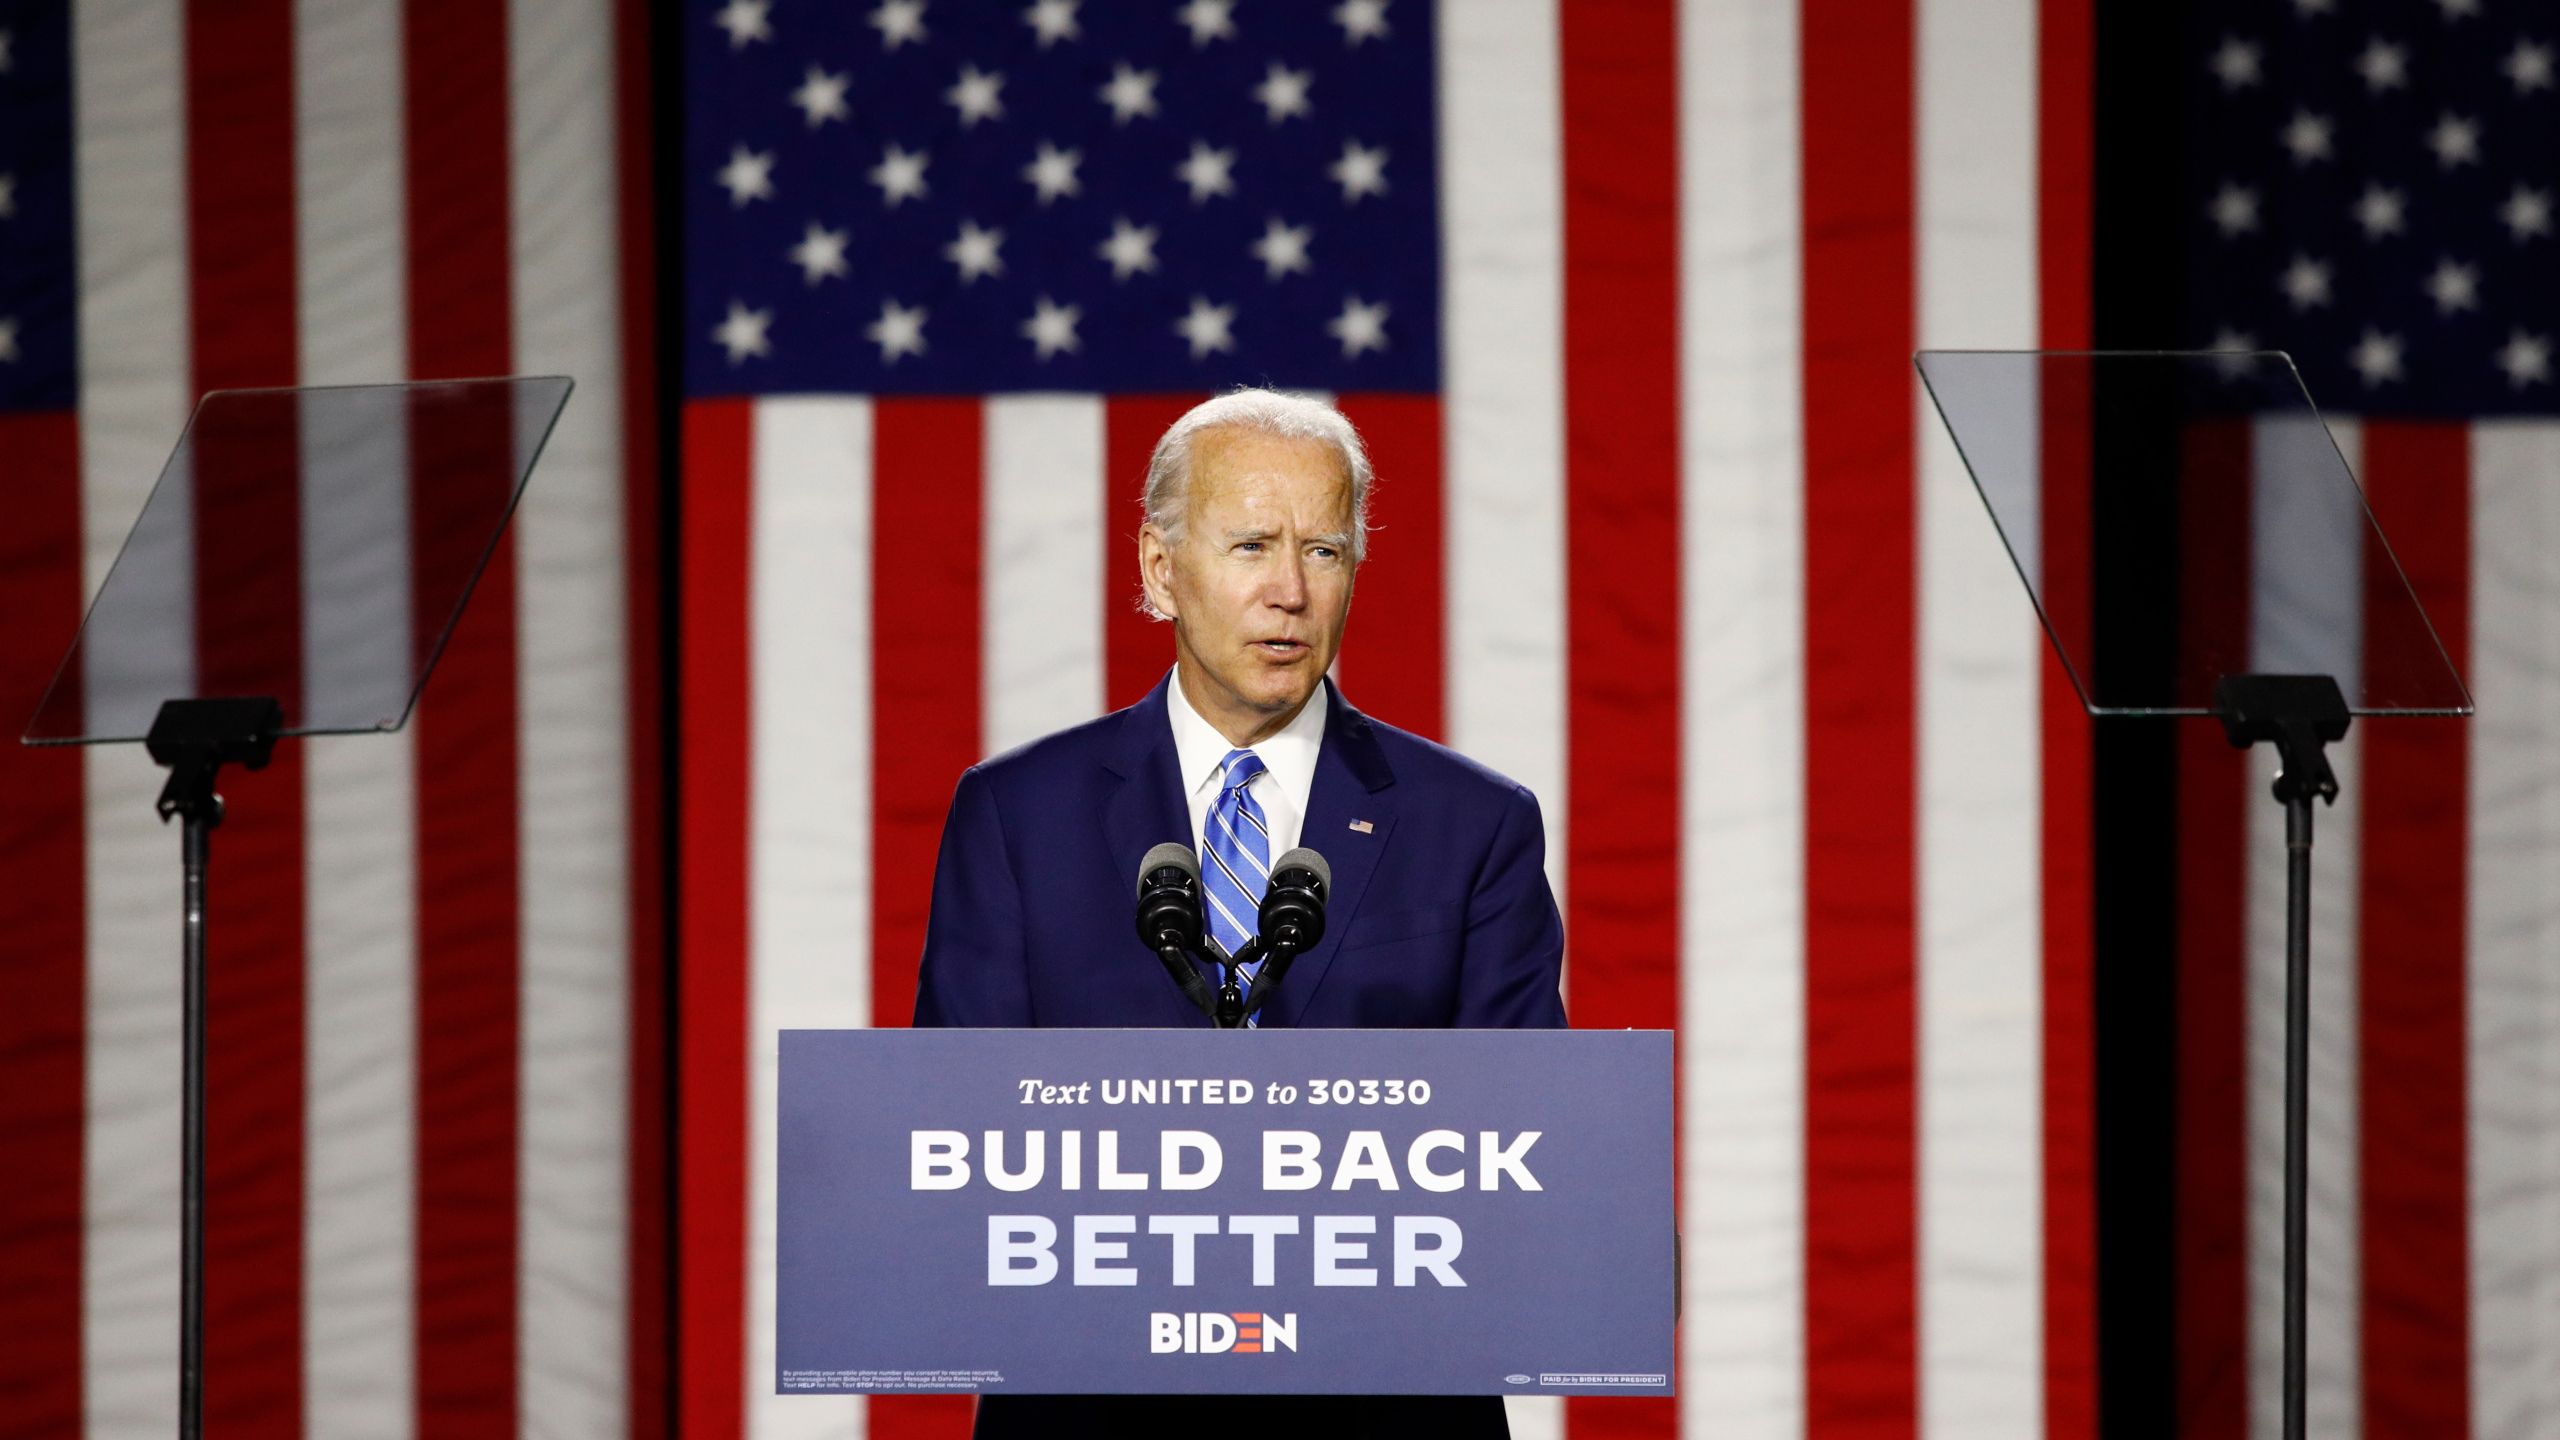 Biden: After intel briefings, warns of election interference. KRQE News 13